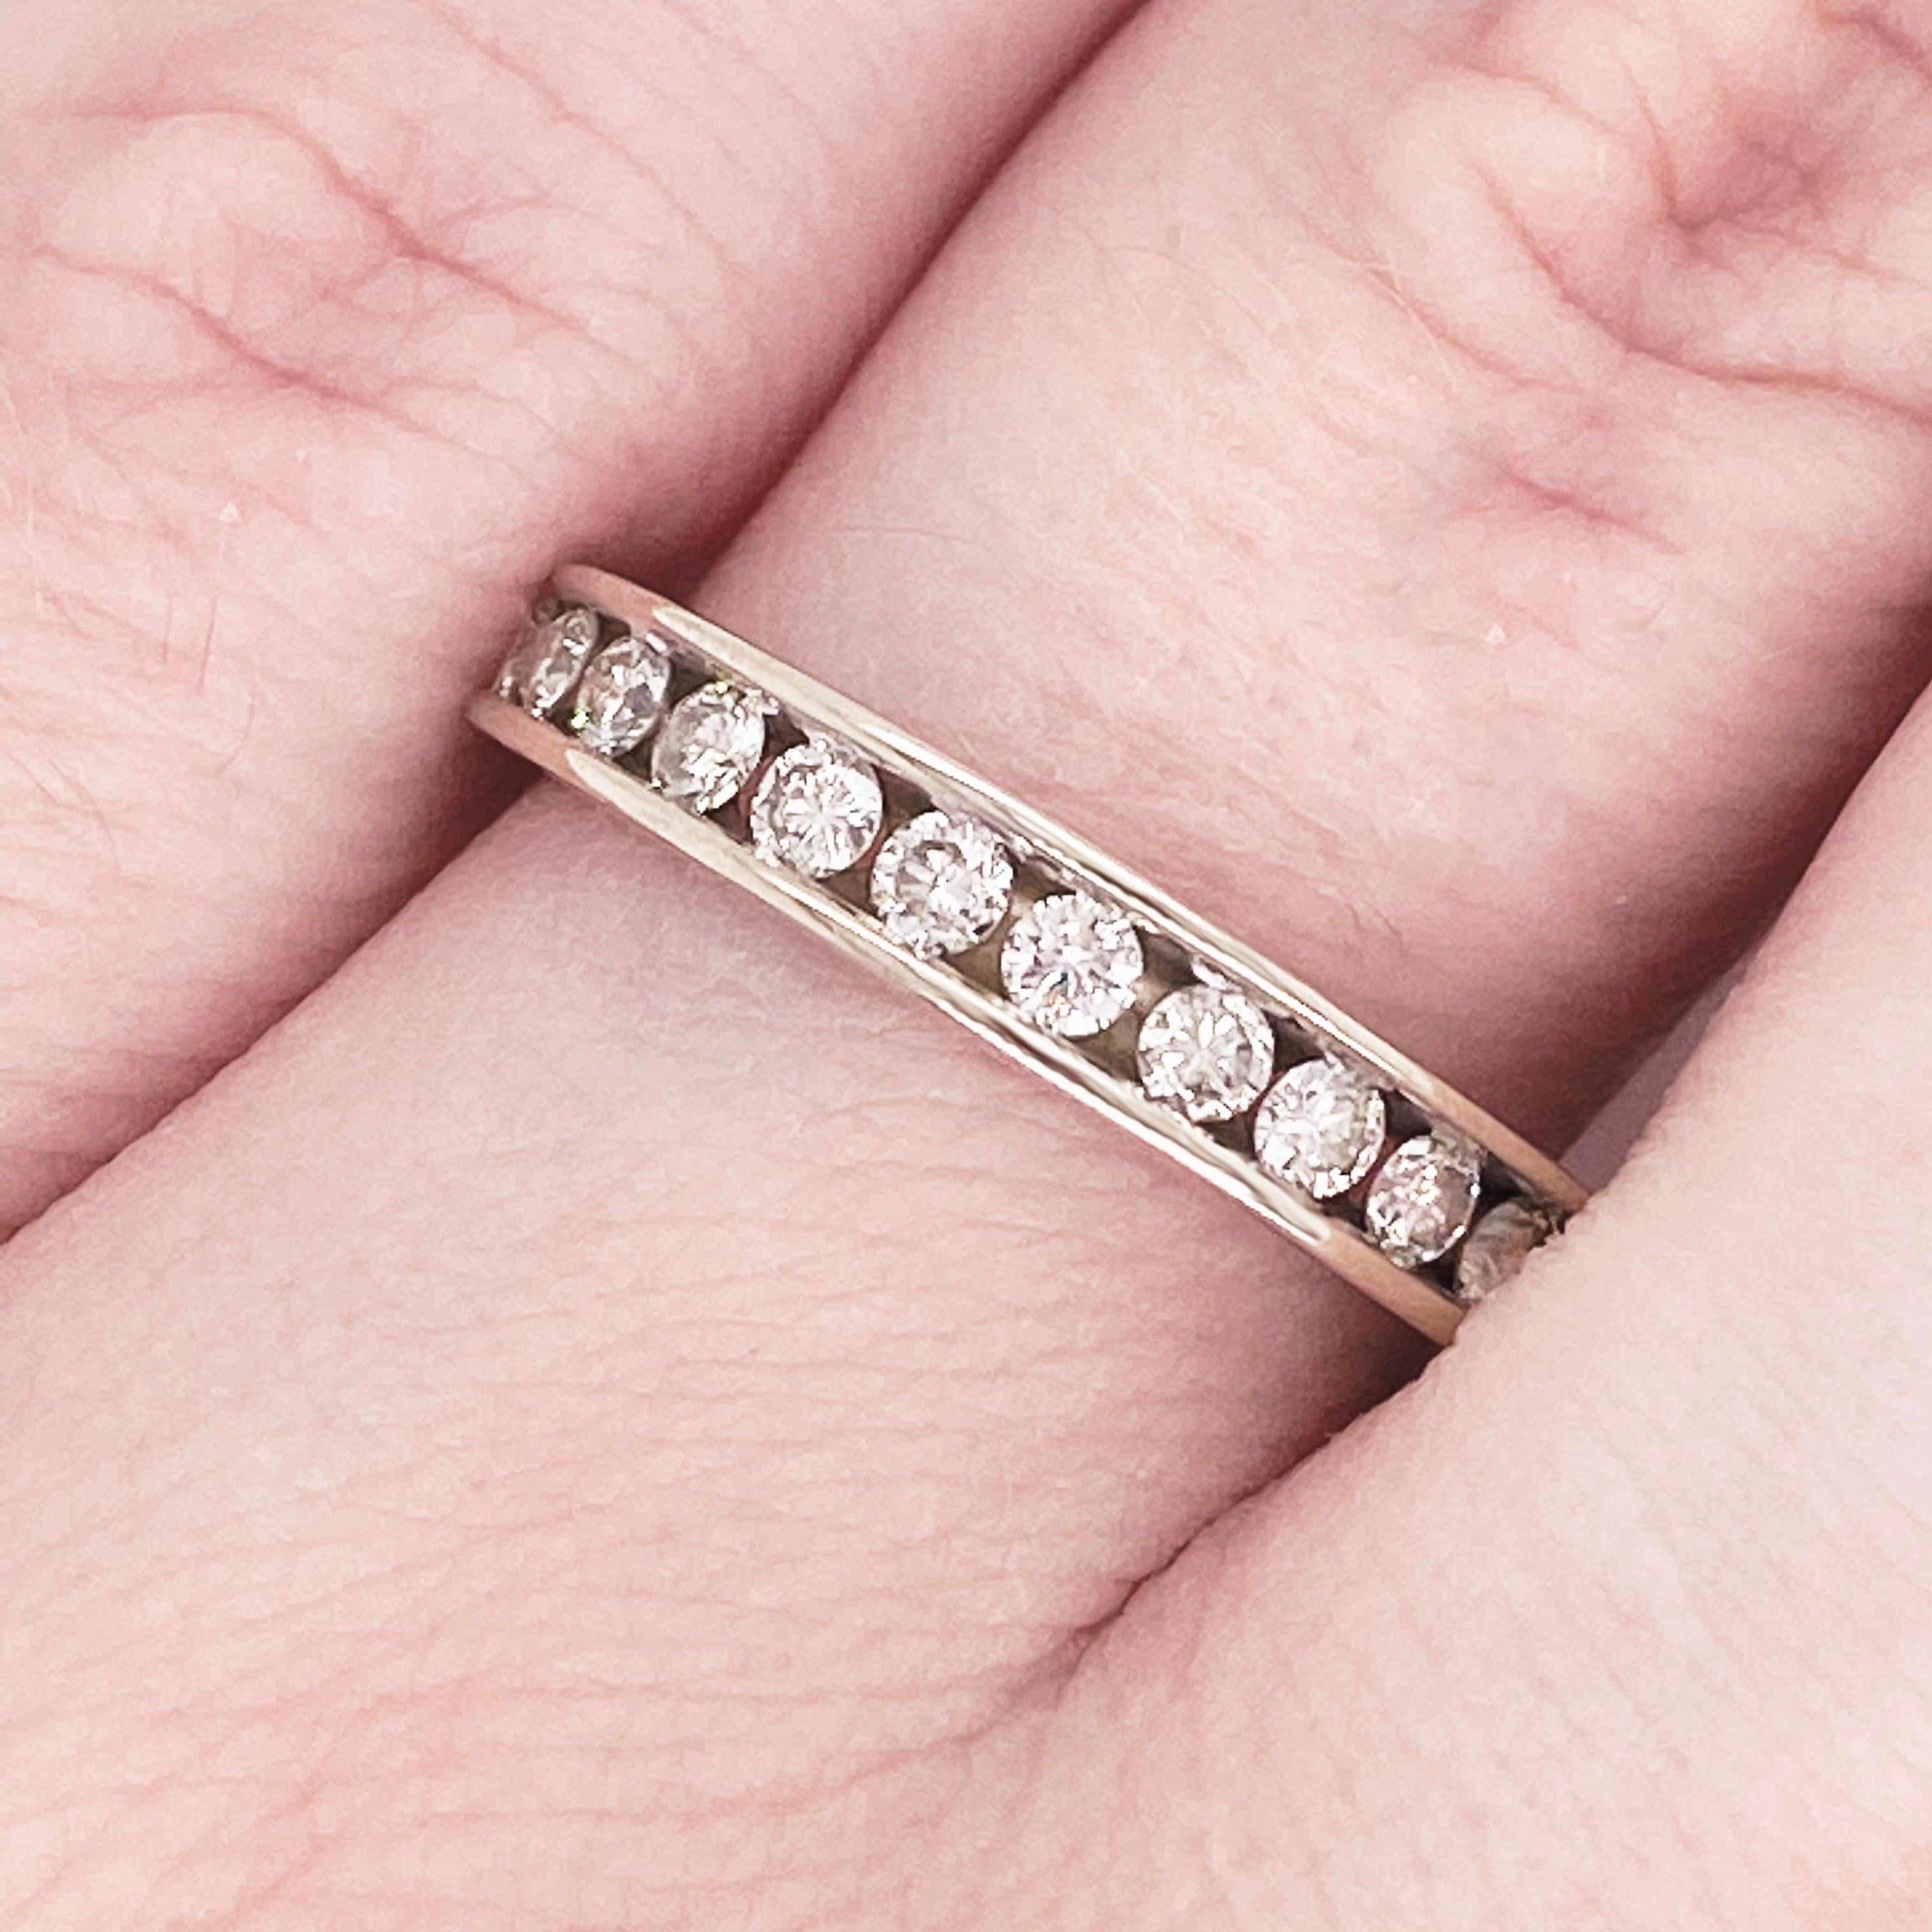 This stunningly beautiful polished white gold band dripping with round diamonds provides a look that is very classic and modern at the same time! This ring is very fashionable and can add a touch of style to any outfit, yet it is very classy and can